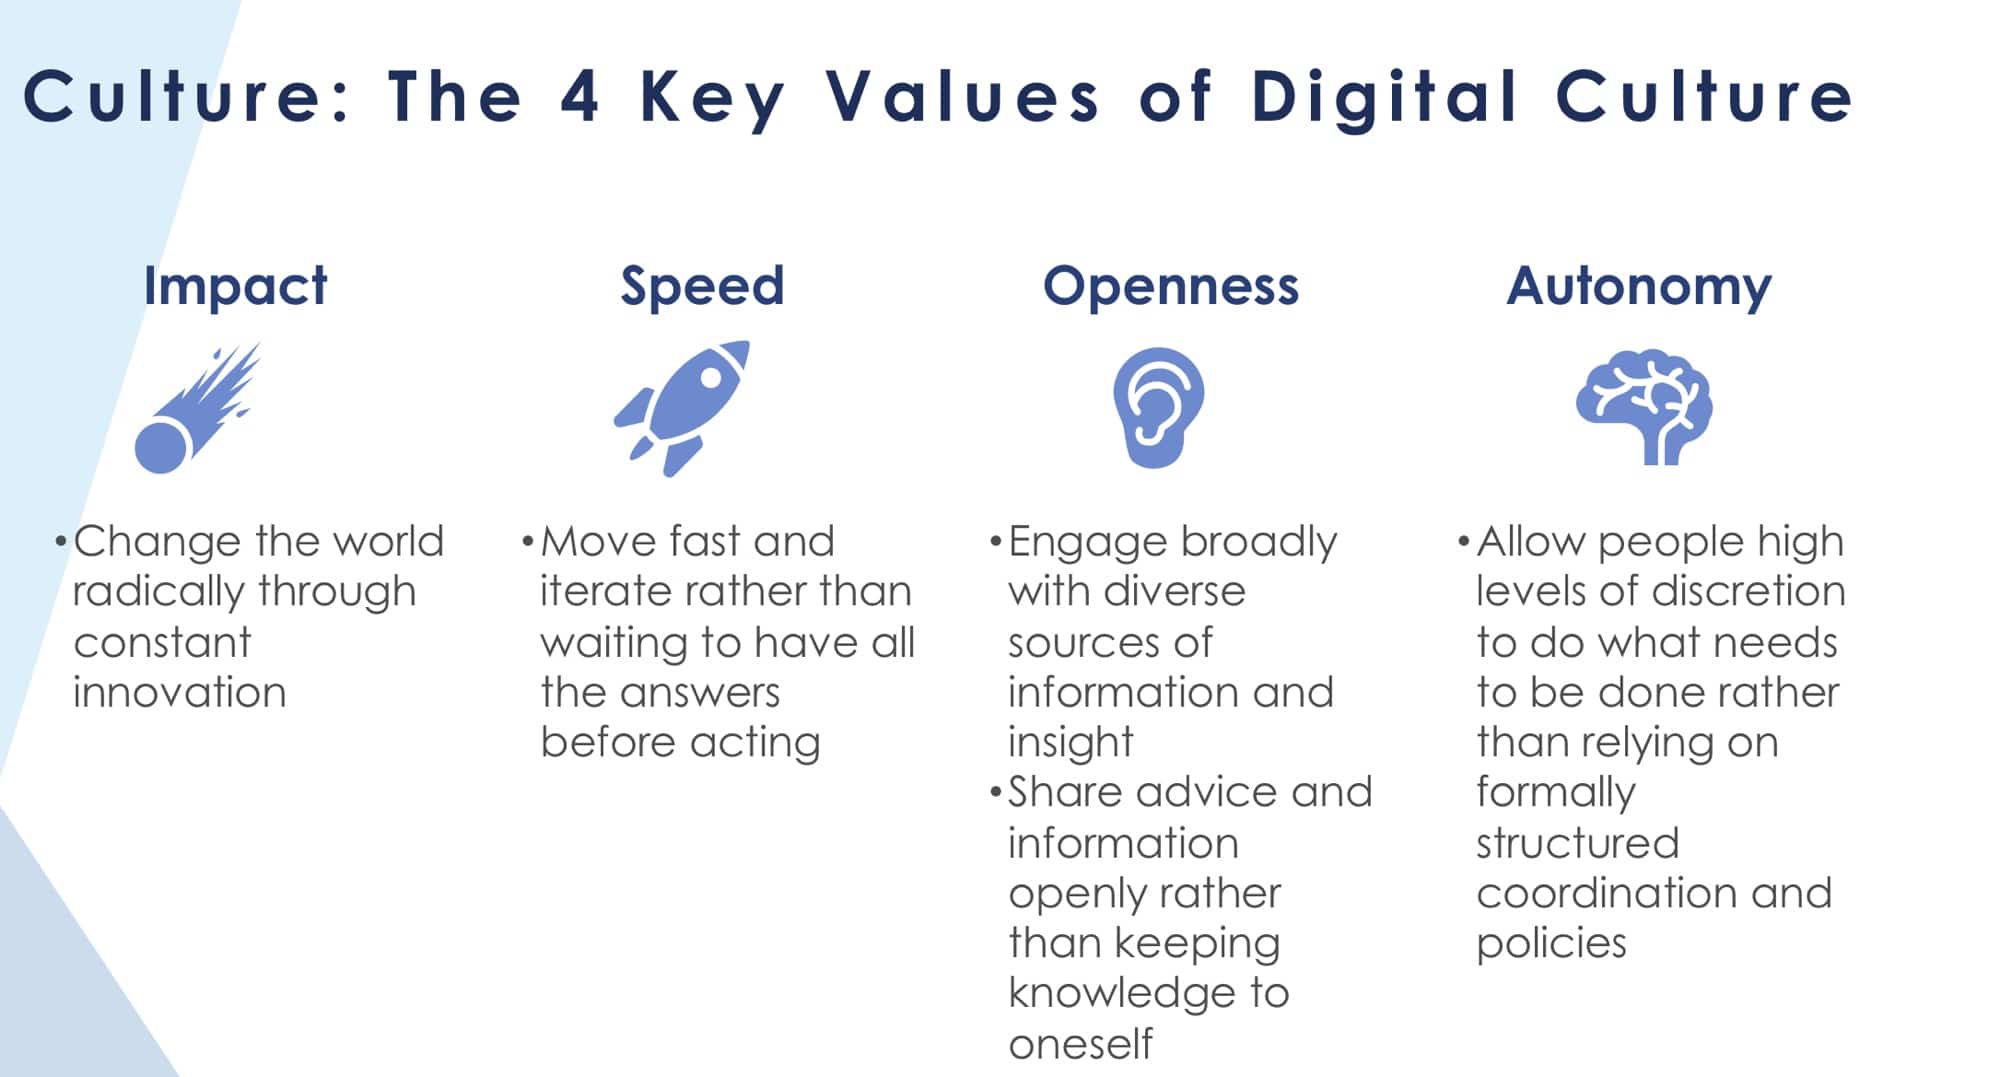 Digital Transformation in Traditional Organizations. It all starts with Culture. 4